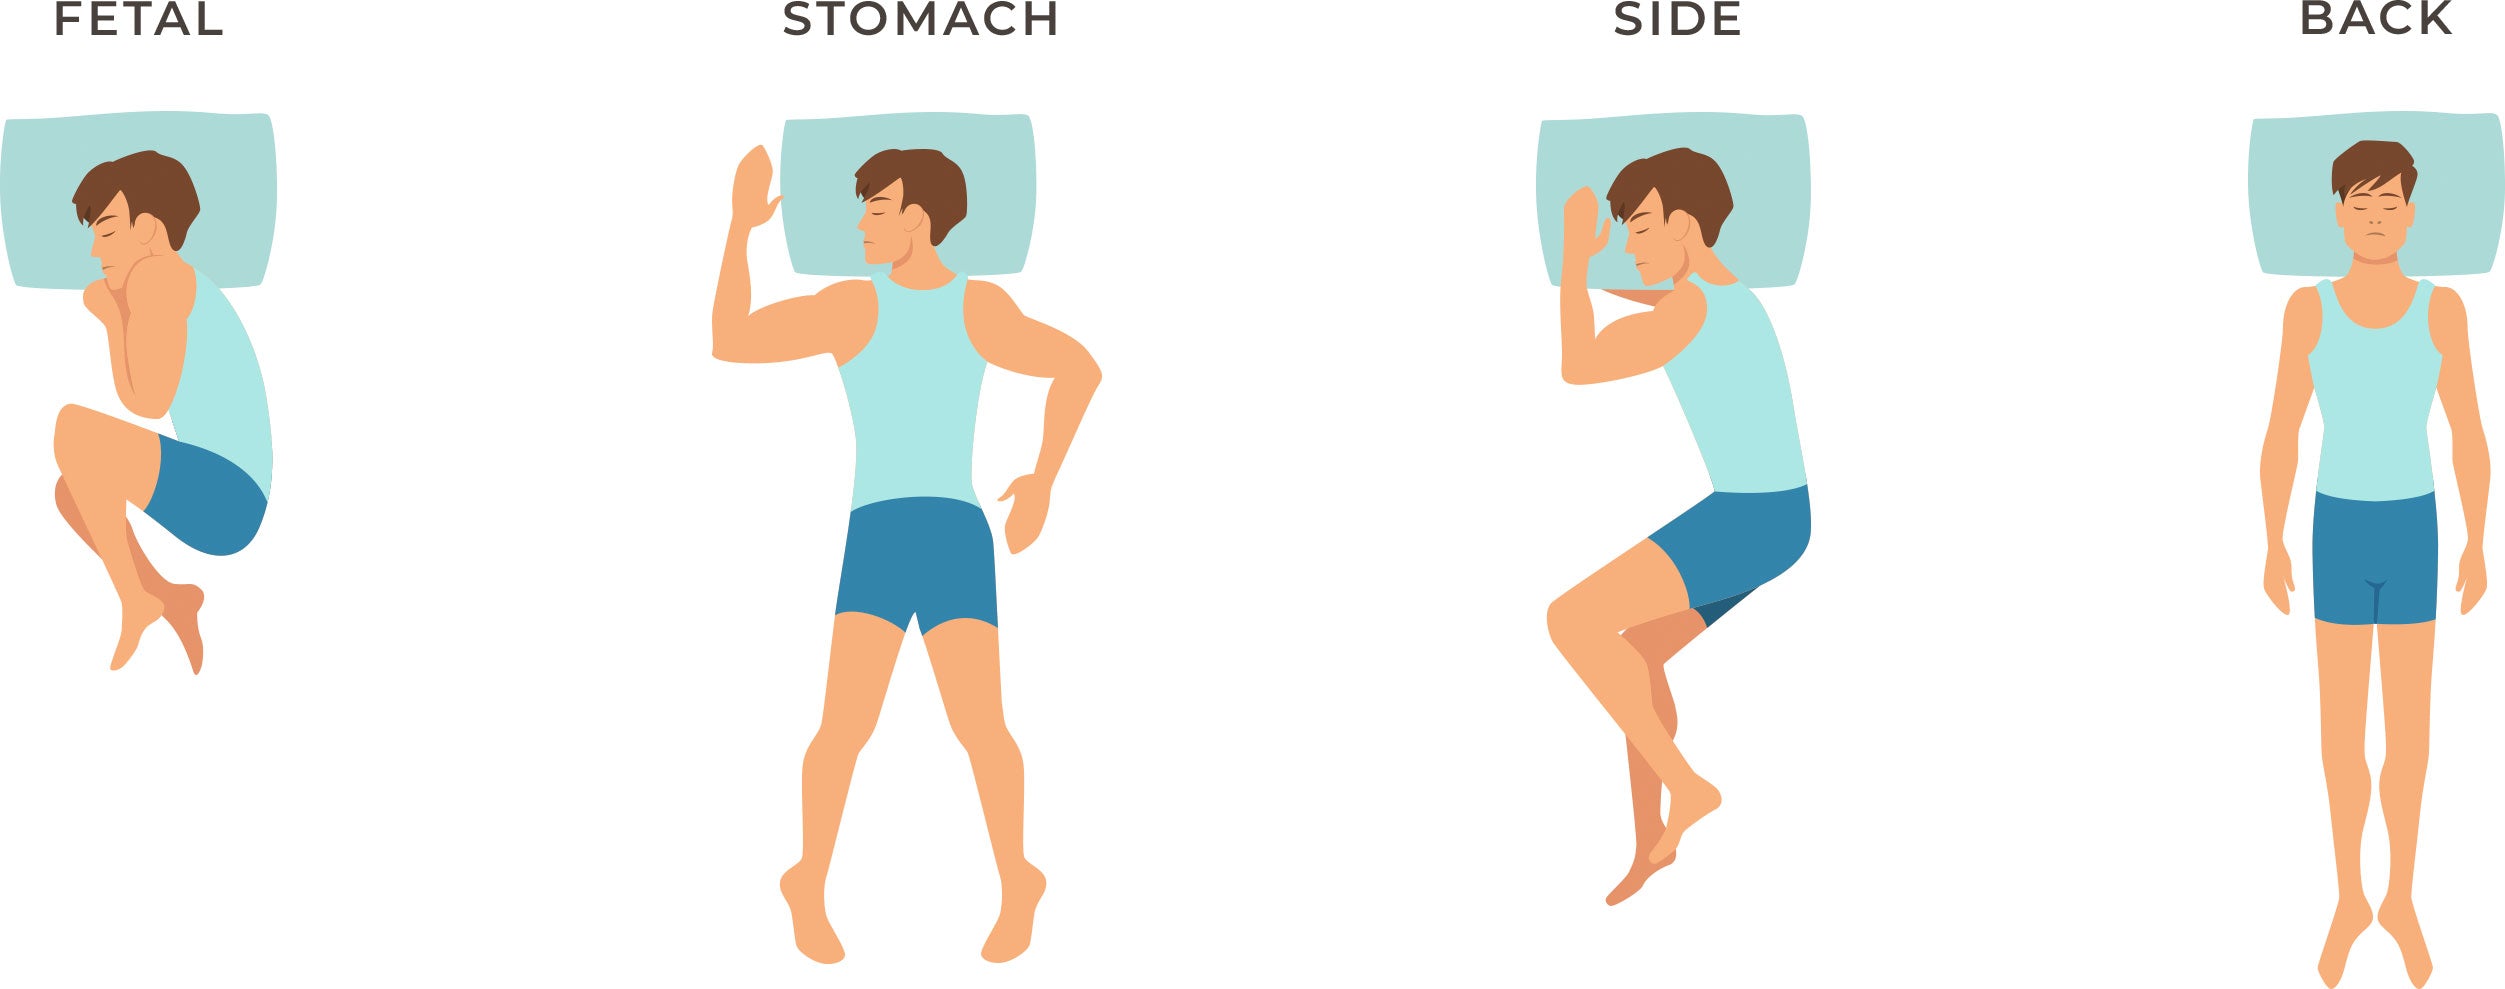 How Your Sleeping Positions Affect Your Back — Williamsburg